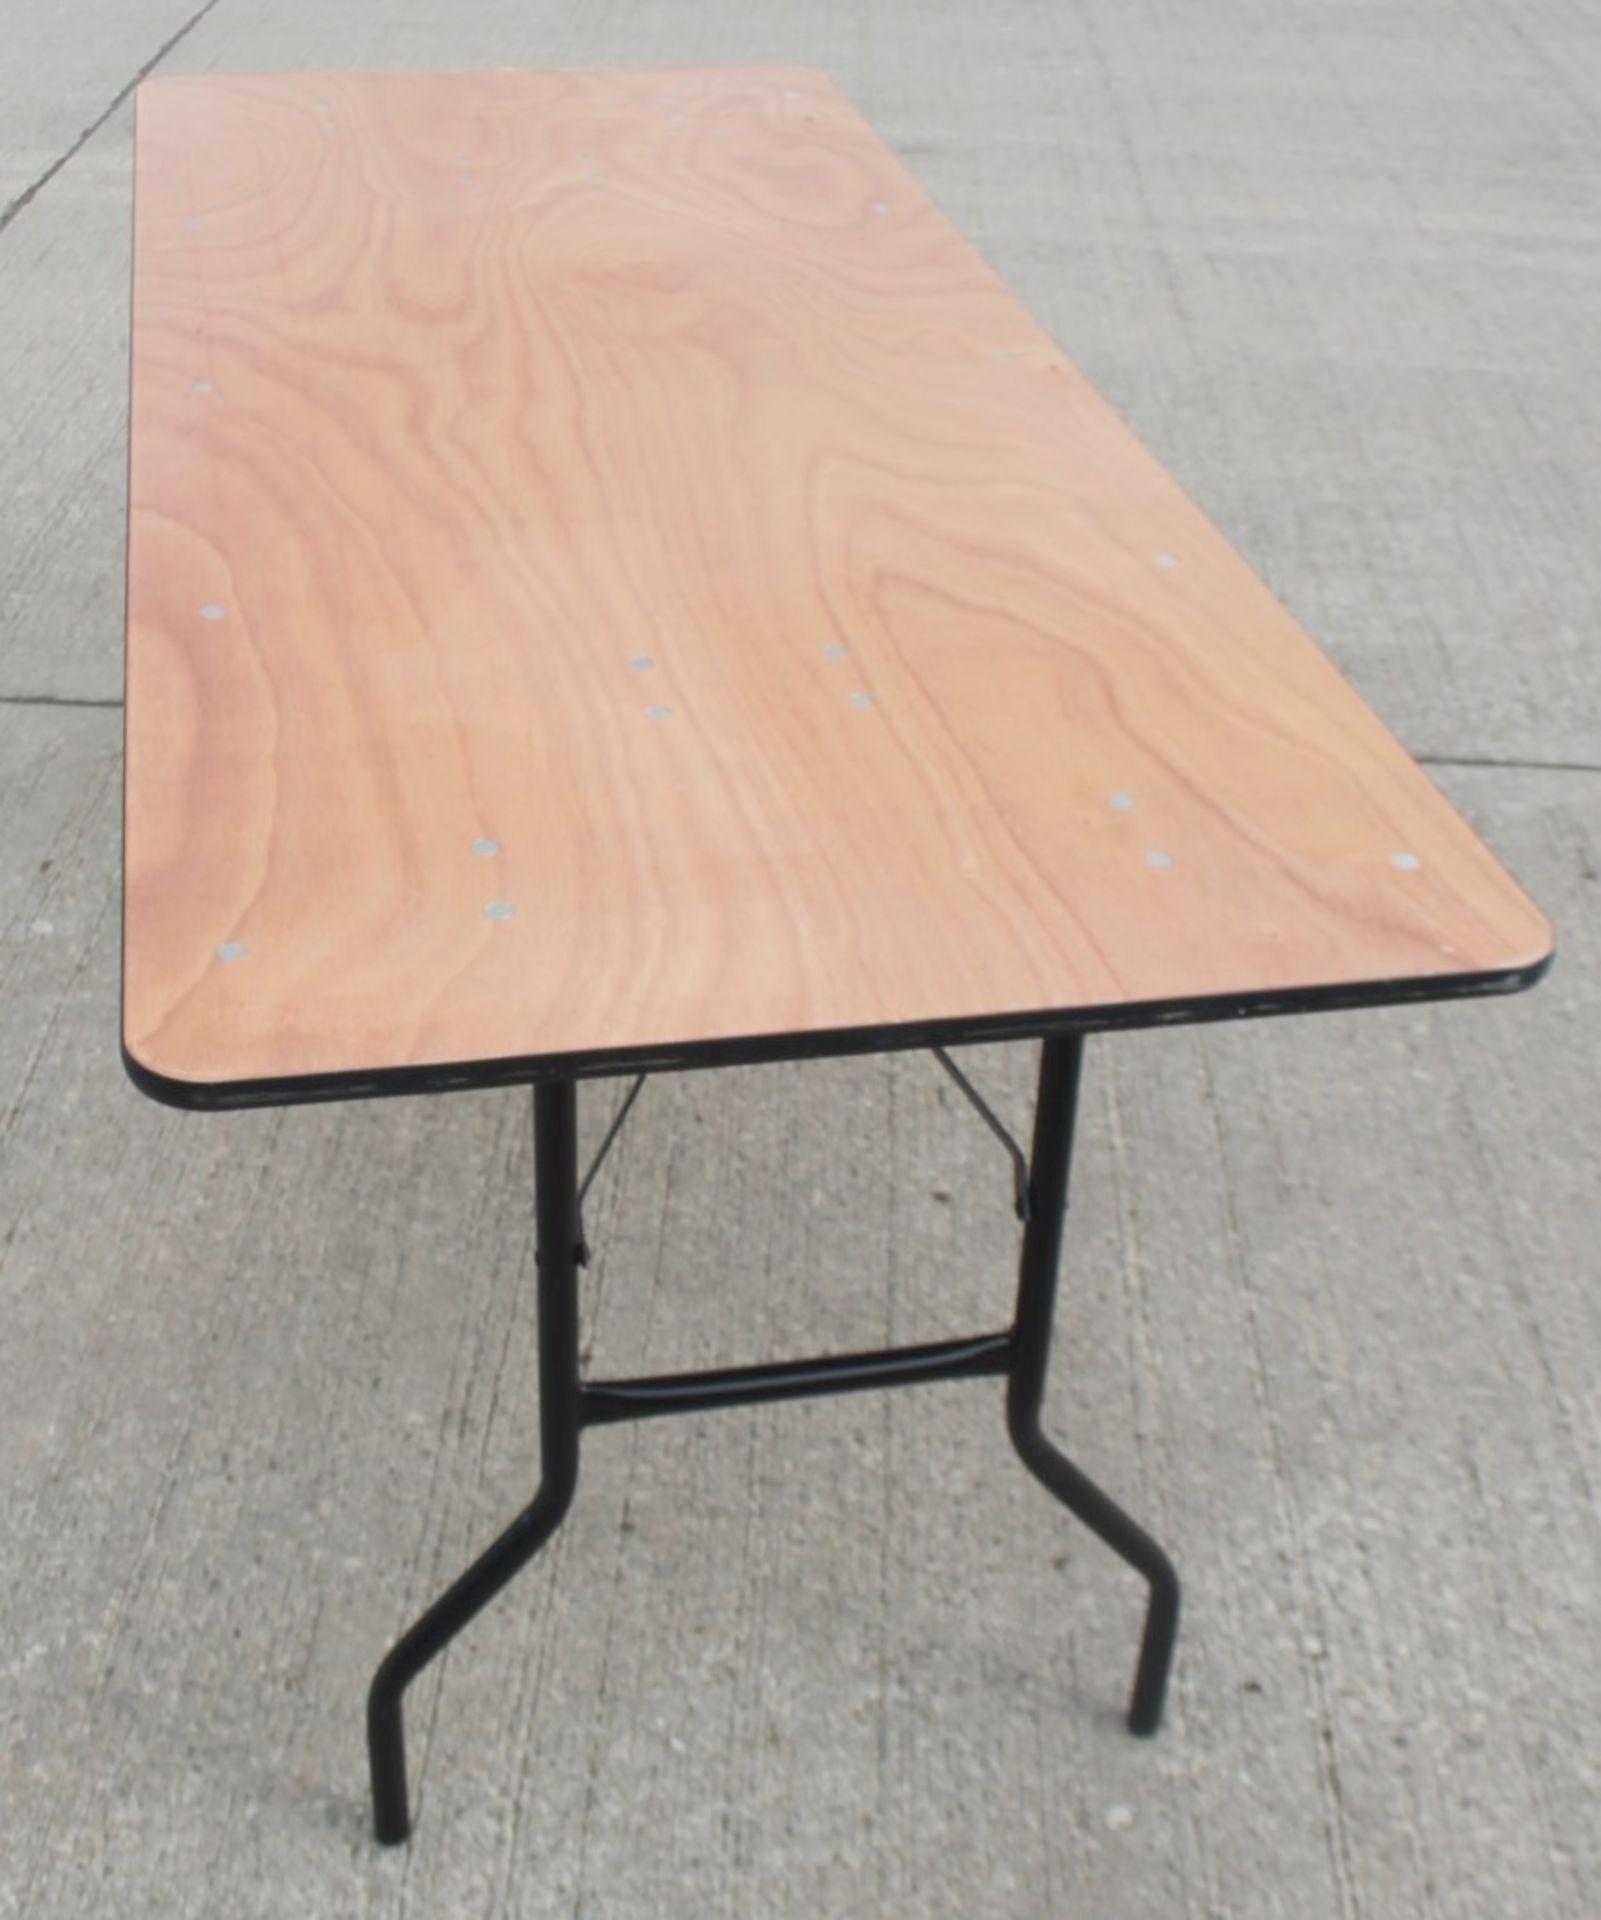 3 x Wooden Trestle Tables With Folding Tubular Metal Legs - From An Exclusive Property - Image 2 of 5